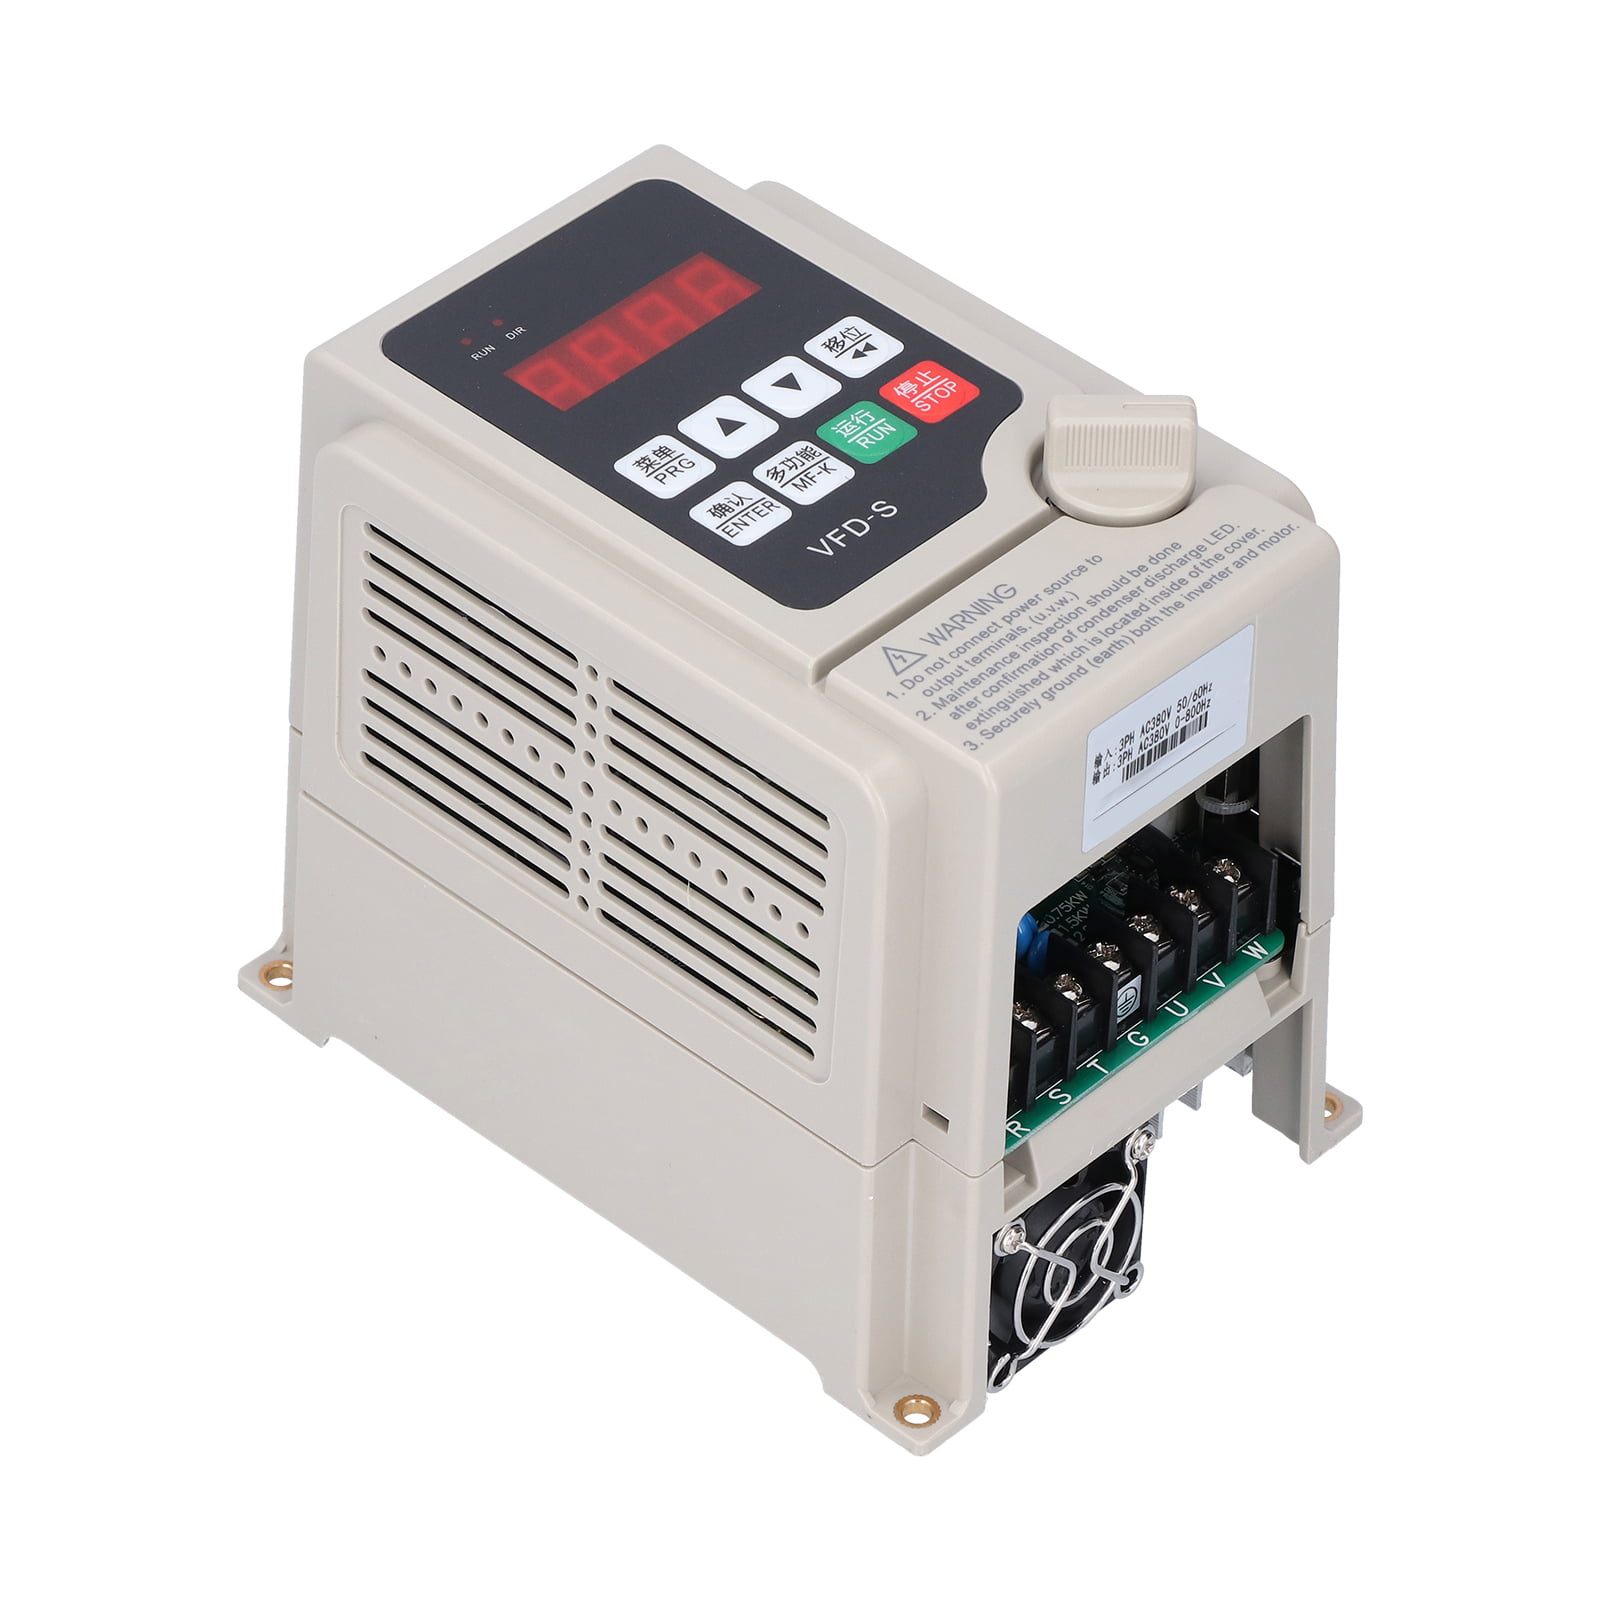 Details about   2.2KW 220V VFD Three phas Phase Input 220v And 3 Phase Output Frequency Inverter 